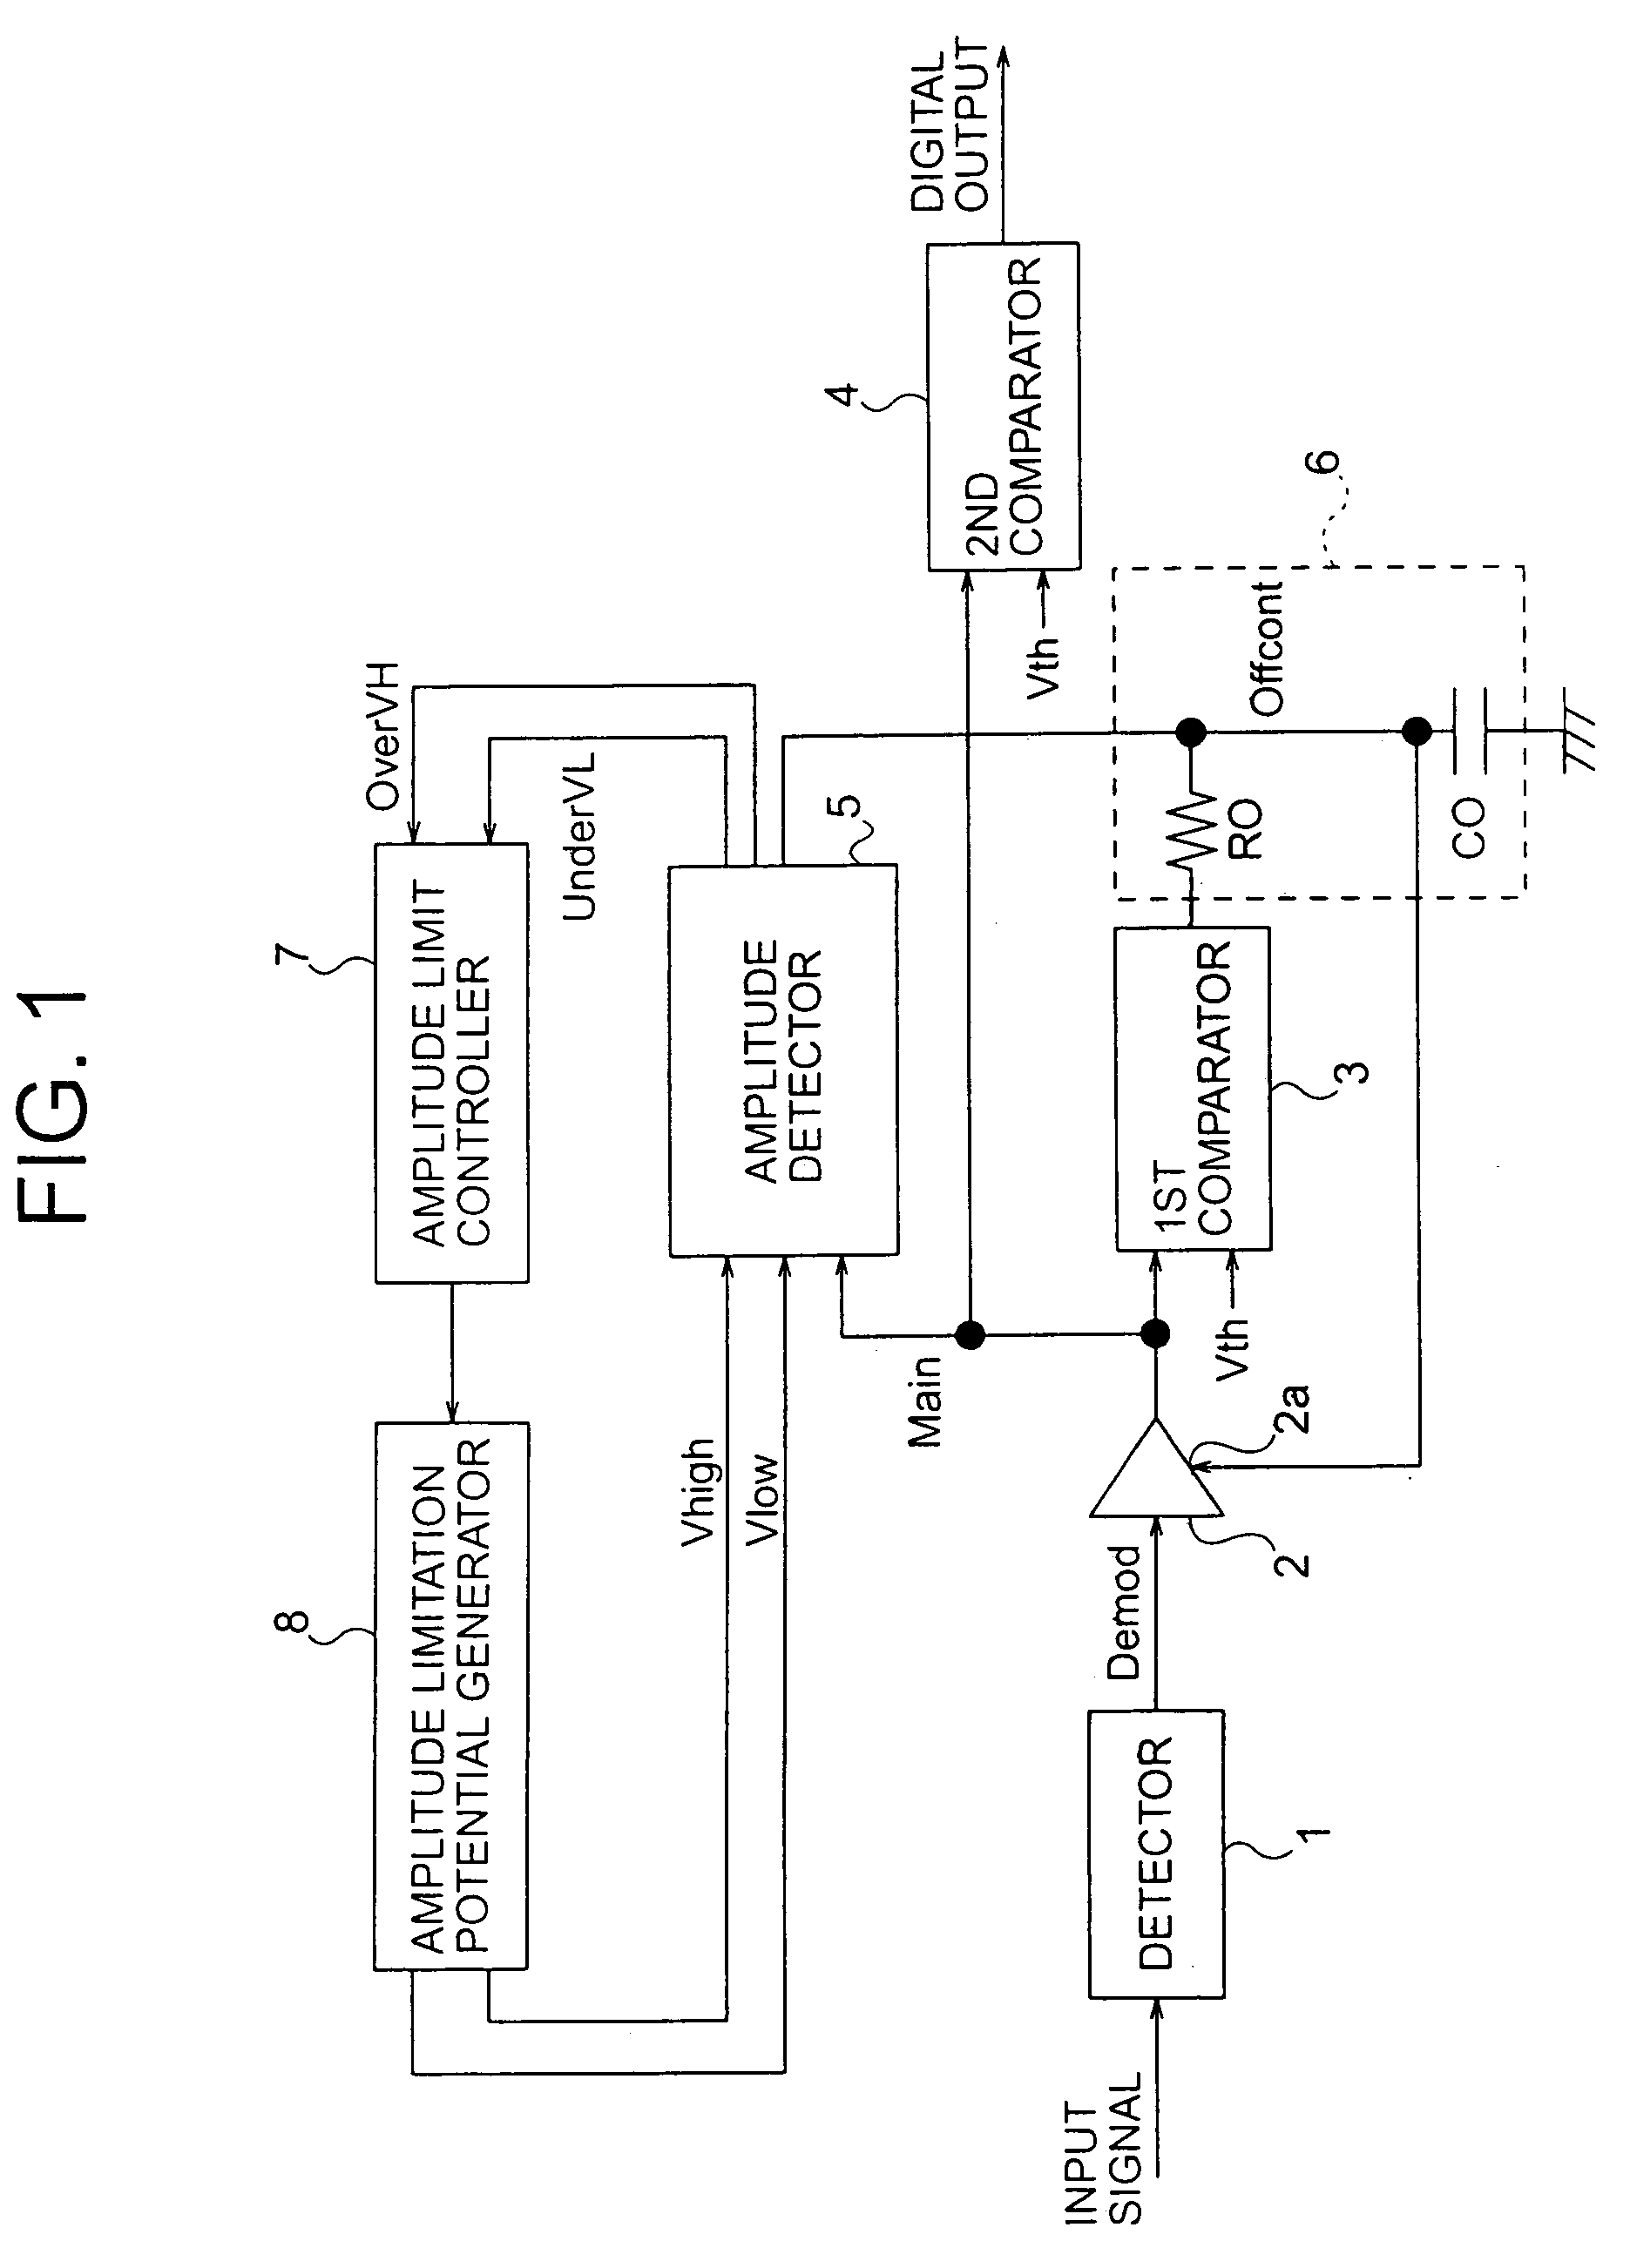 Signal compensation circuit and demodulating circuit with high-speed and low-speed feedback loops